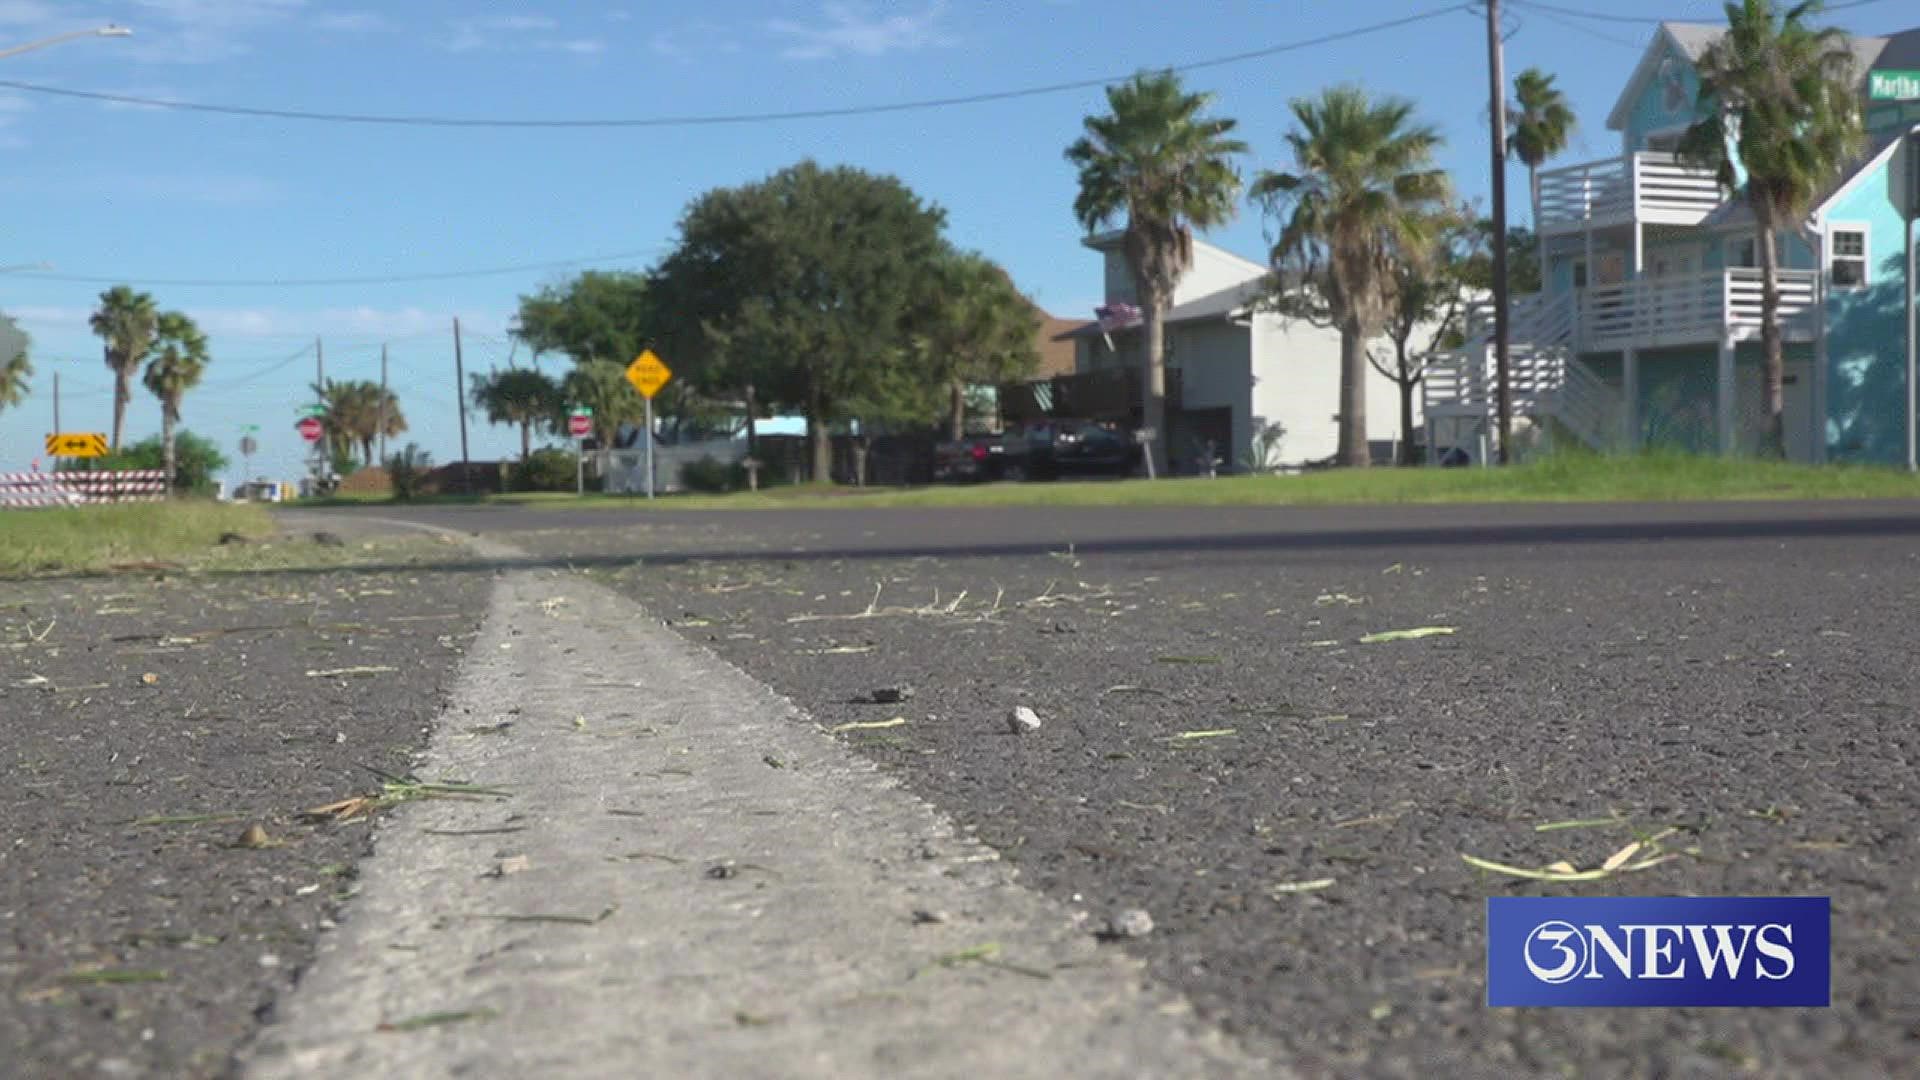 "The street that is within their property will now become essentially private property," said interim public works director Gabriel Hinojosa.